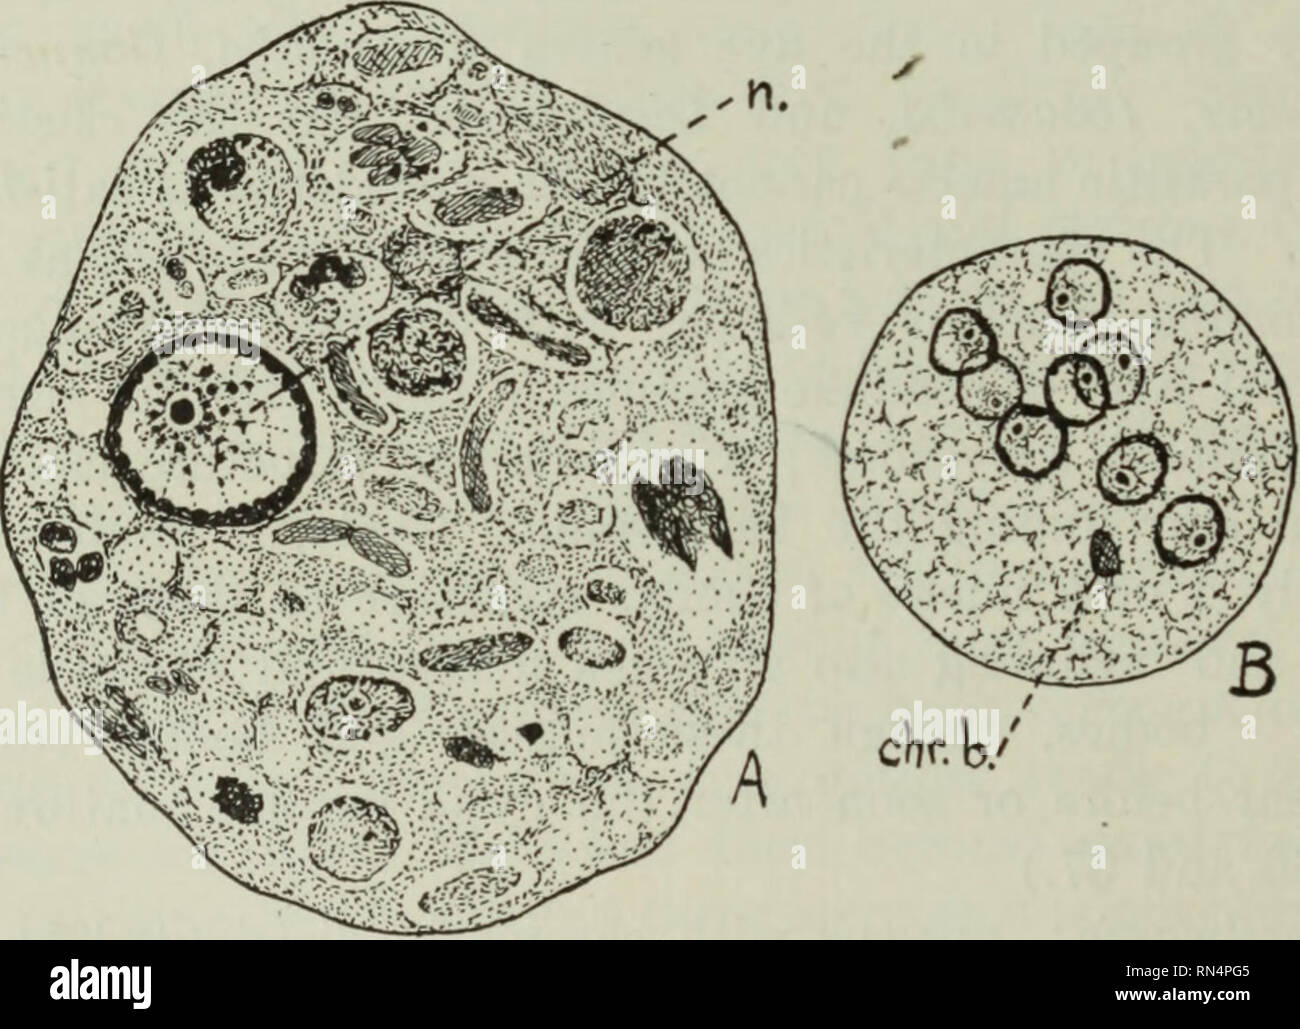 . Animal parasites and human disease. Parasites; Medical parasitology; Insects as carriers of disease. Fig. 36. Endamoeba histolytica. X 1650. A, stained vegetative ameba; B, cyst with four nuclei; n., nucleus, showing peripheral chromatin granules and central karyosome; r. b. c, ingested red blood corpuscles; chr. b., chromatoid body. (After Dobell.). Fig. 37. Endamoeba coli. X 1650. A, stained vegetative ameba; B, cyst, with eight nuclei; n., nucleus, showing coarse peripheral chromatin granules, chromatin granules in &quot;clear zone&quot; between periphery and karyosome, and eccentric kary Stock Photo